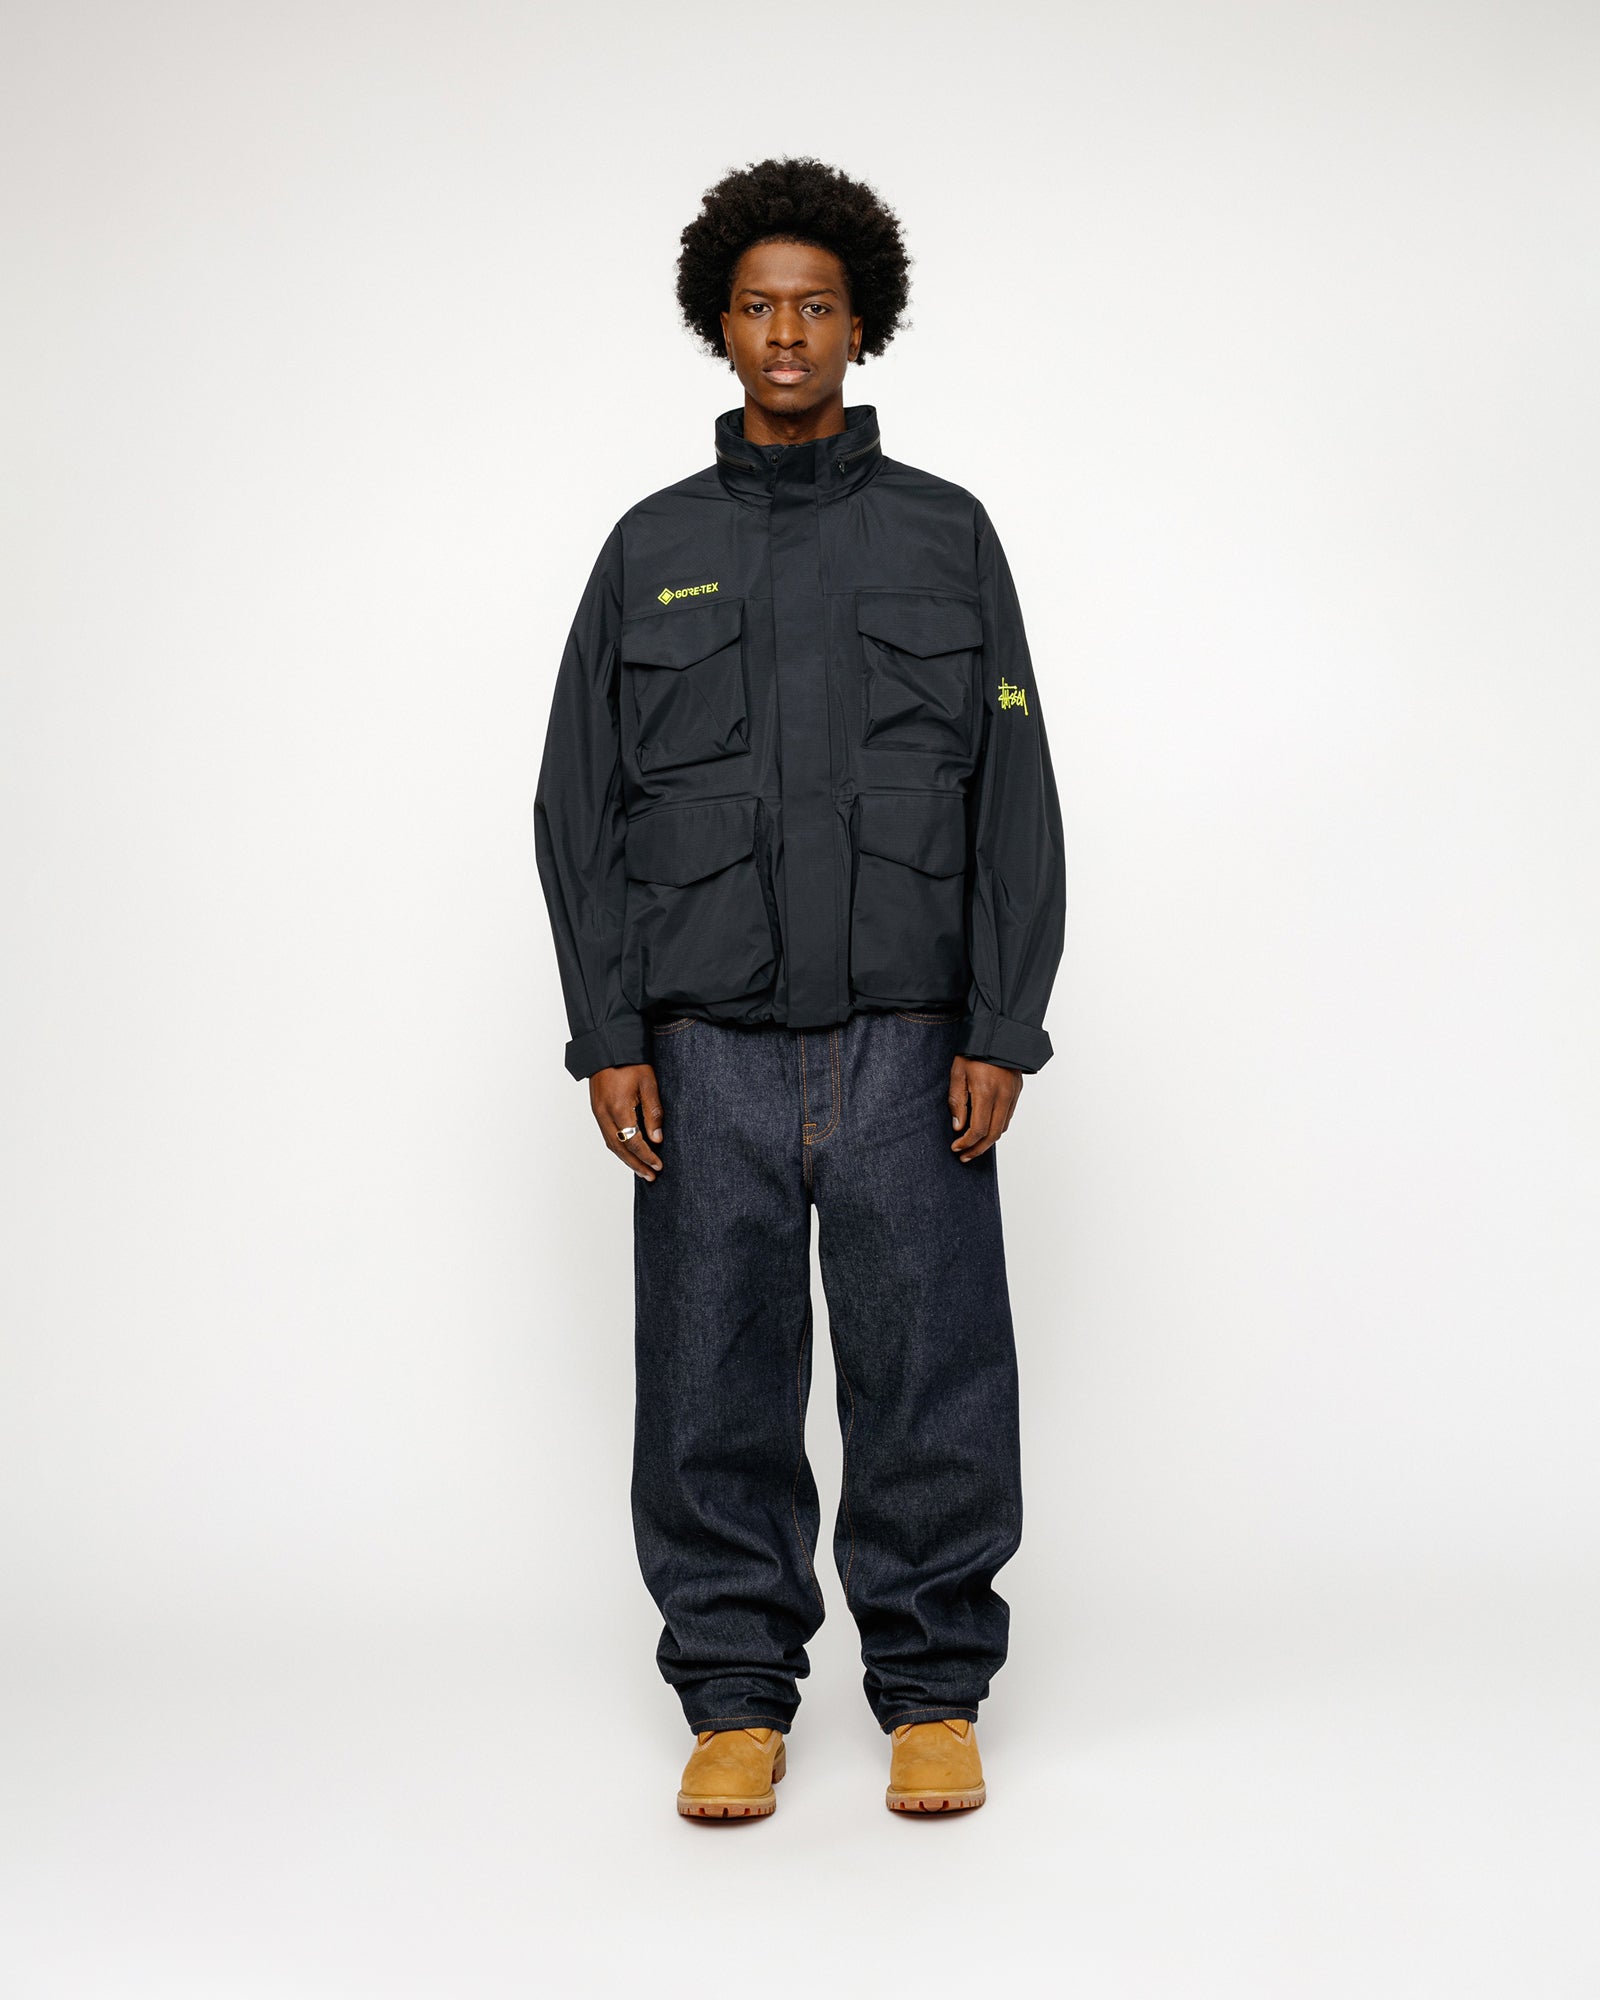 Pants: Work Pants, Cargo Pants & Jeans by Stussy – tagged 